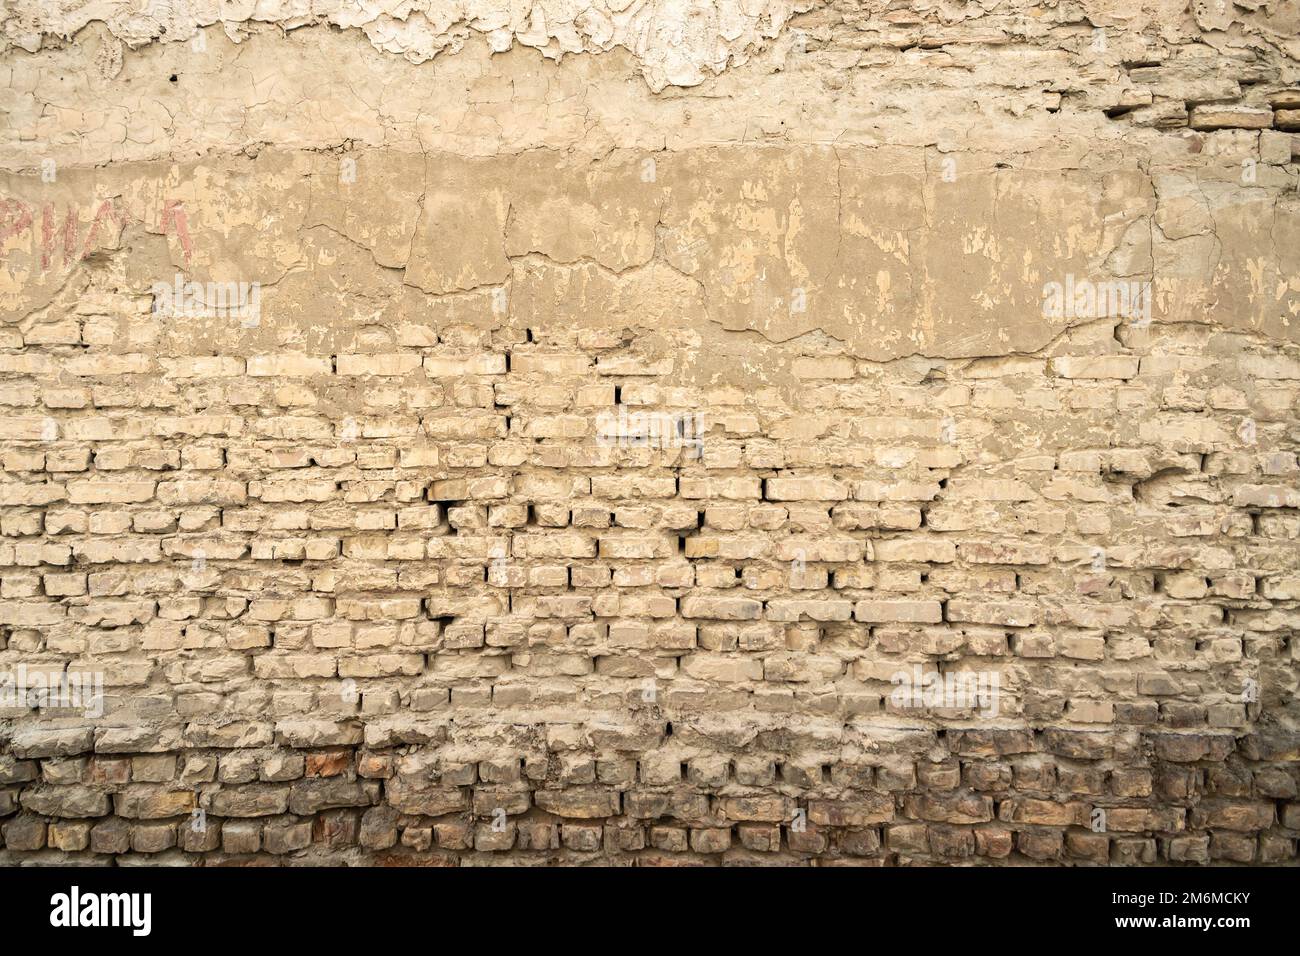 Old brick wall. Nice vintage textured background. Stock Photo